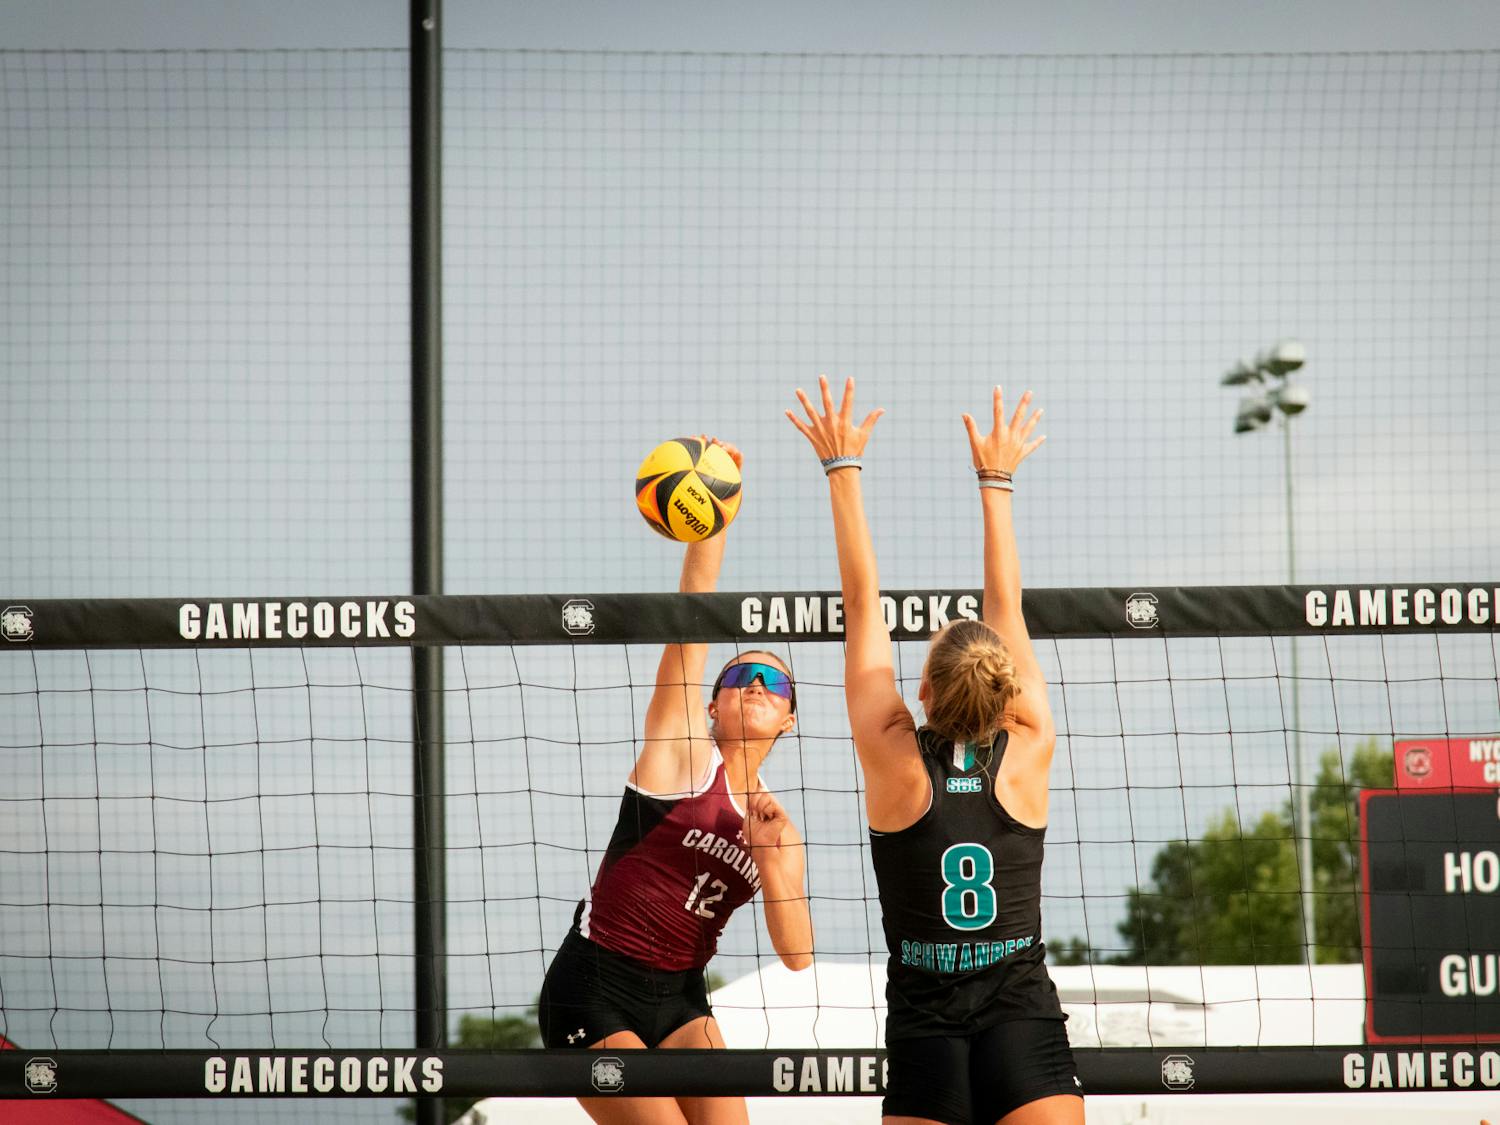 Freshman Morgan Downs strikes the ball while Coastal Carolina players try to block the point. With little success in doing so, Downs and freshman VB Trost were unstoppable, winning their match in two sets, 21-15 and 21-16, on April 14, 2023. &nbsp;&nbsp;